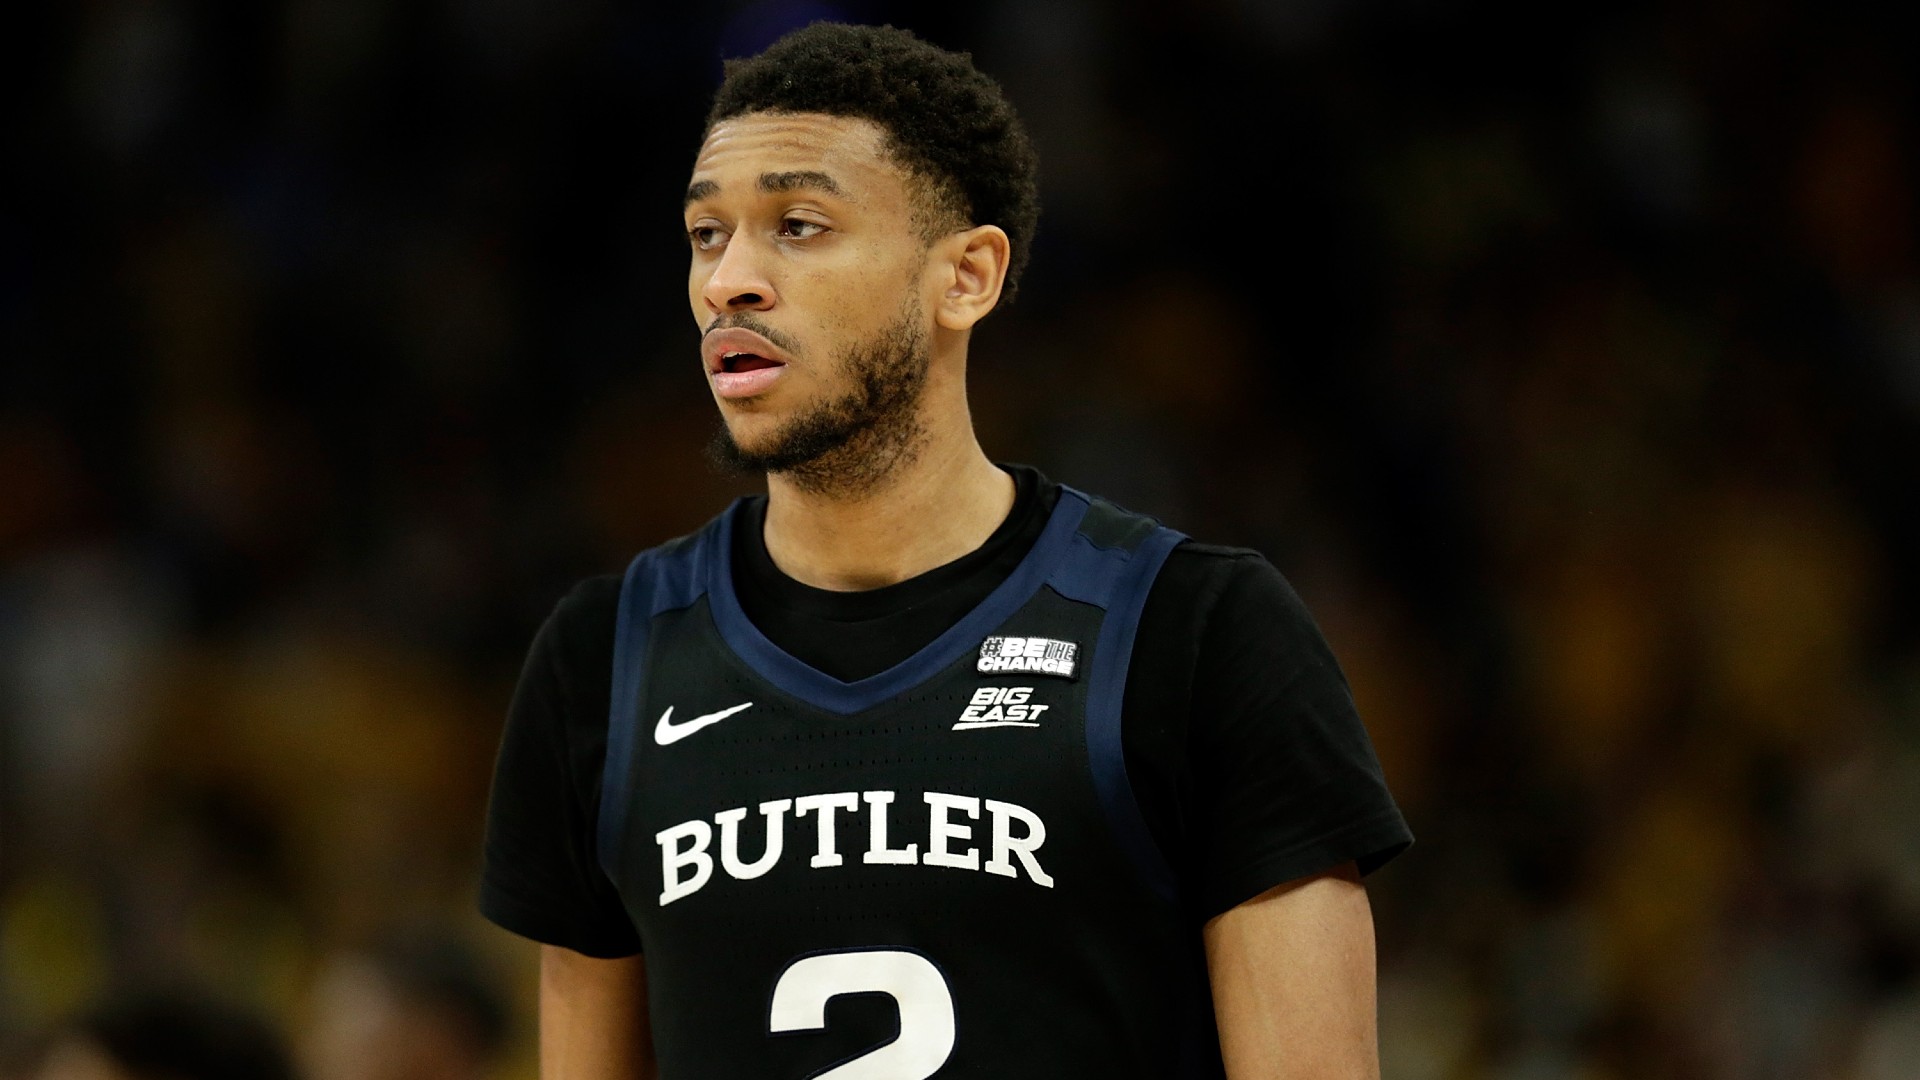 College Basketball Odds & Picks for Villanova vs. Butler: Will Cats Have Motivation in Big East Duel? article feature image